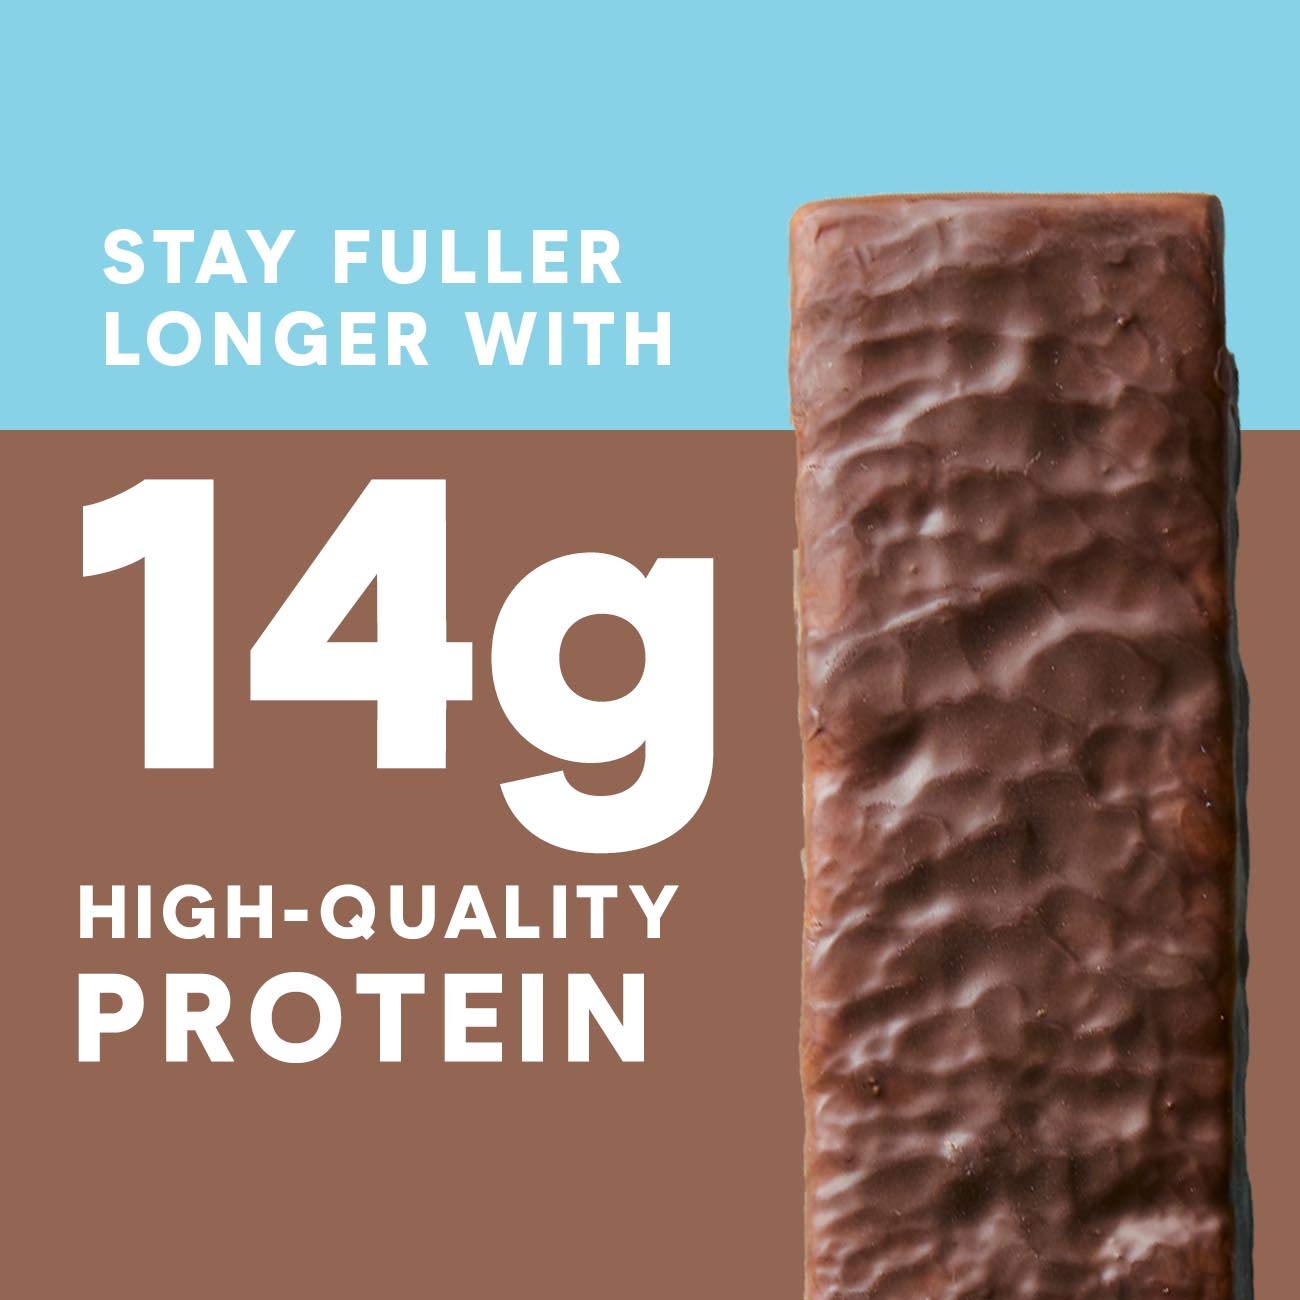 ZonePerfect Protein Bars, 19 vitamins & minerals, 14g protein, Nutritious Snack Bar, Chocolate Peanut Butter, 36 Count